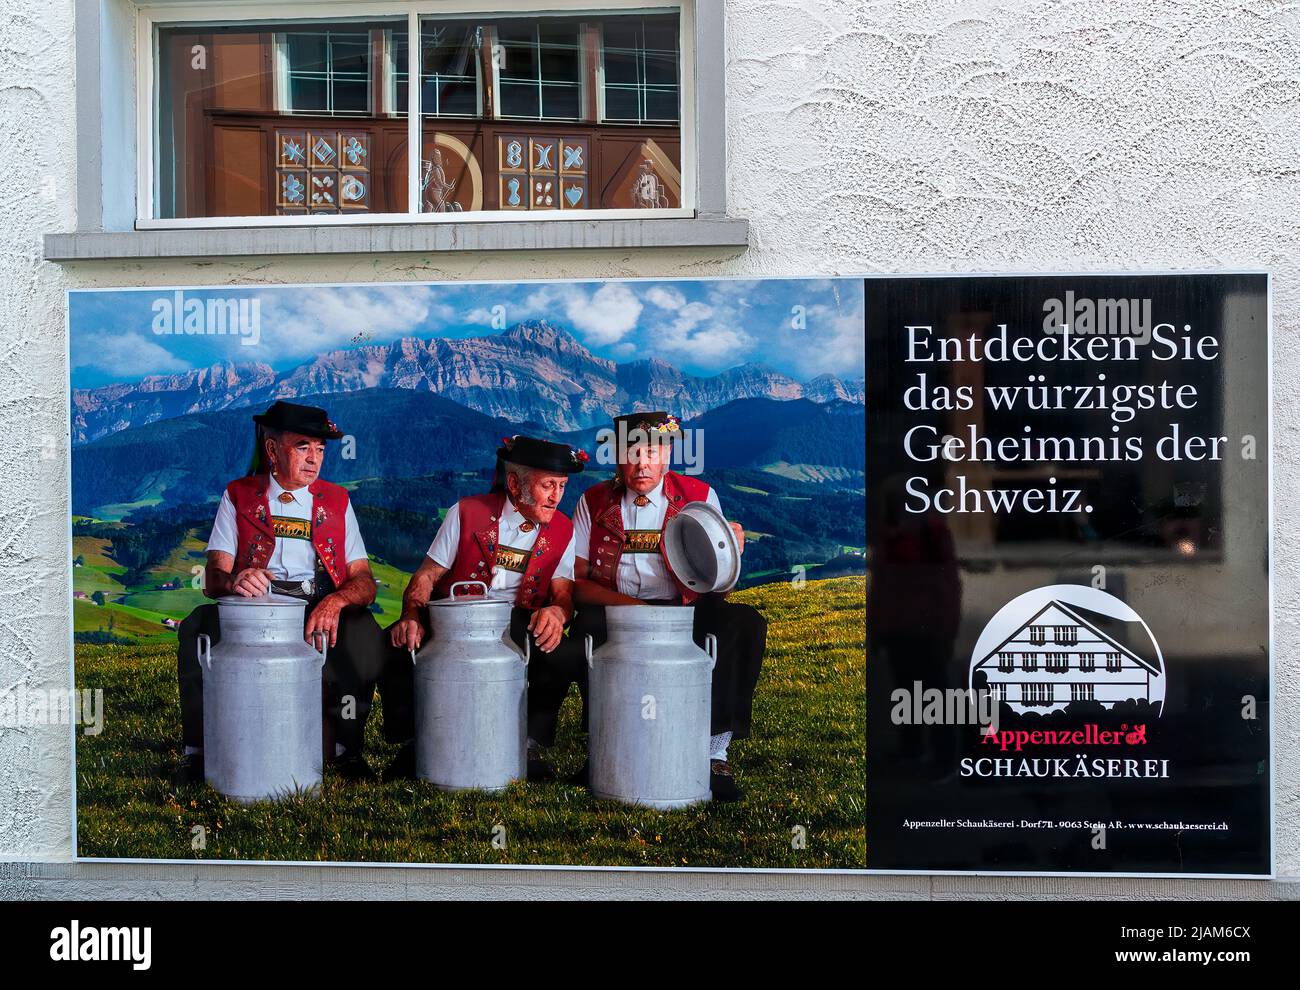 Appenzell, Switzerland - May 27, 2022: Discover spiciest secret of Switzerland - Show dairy Appenzell Stock Photo